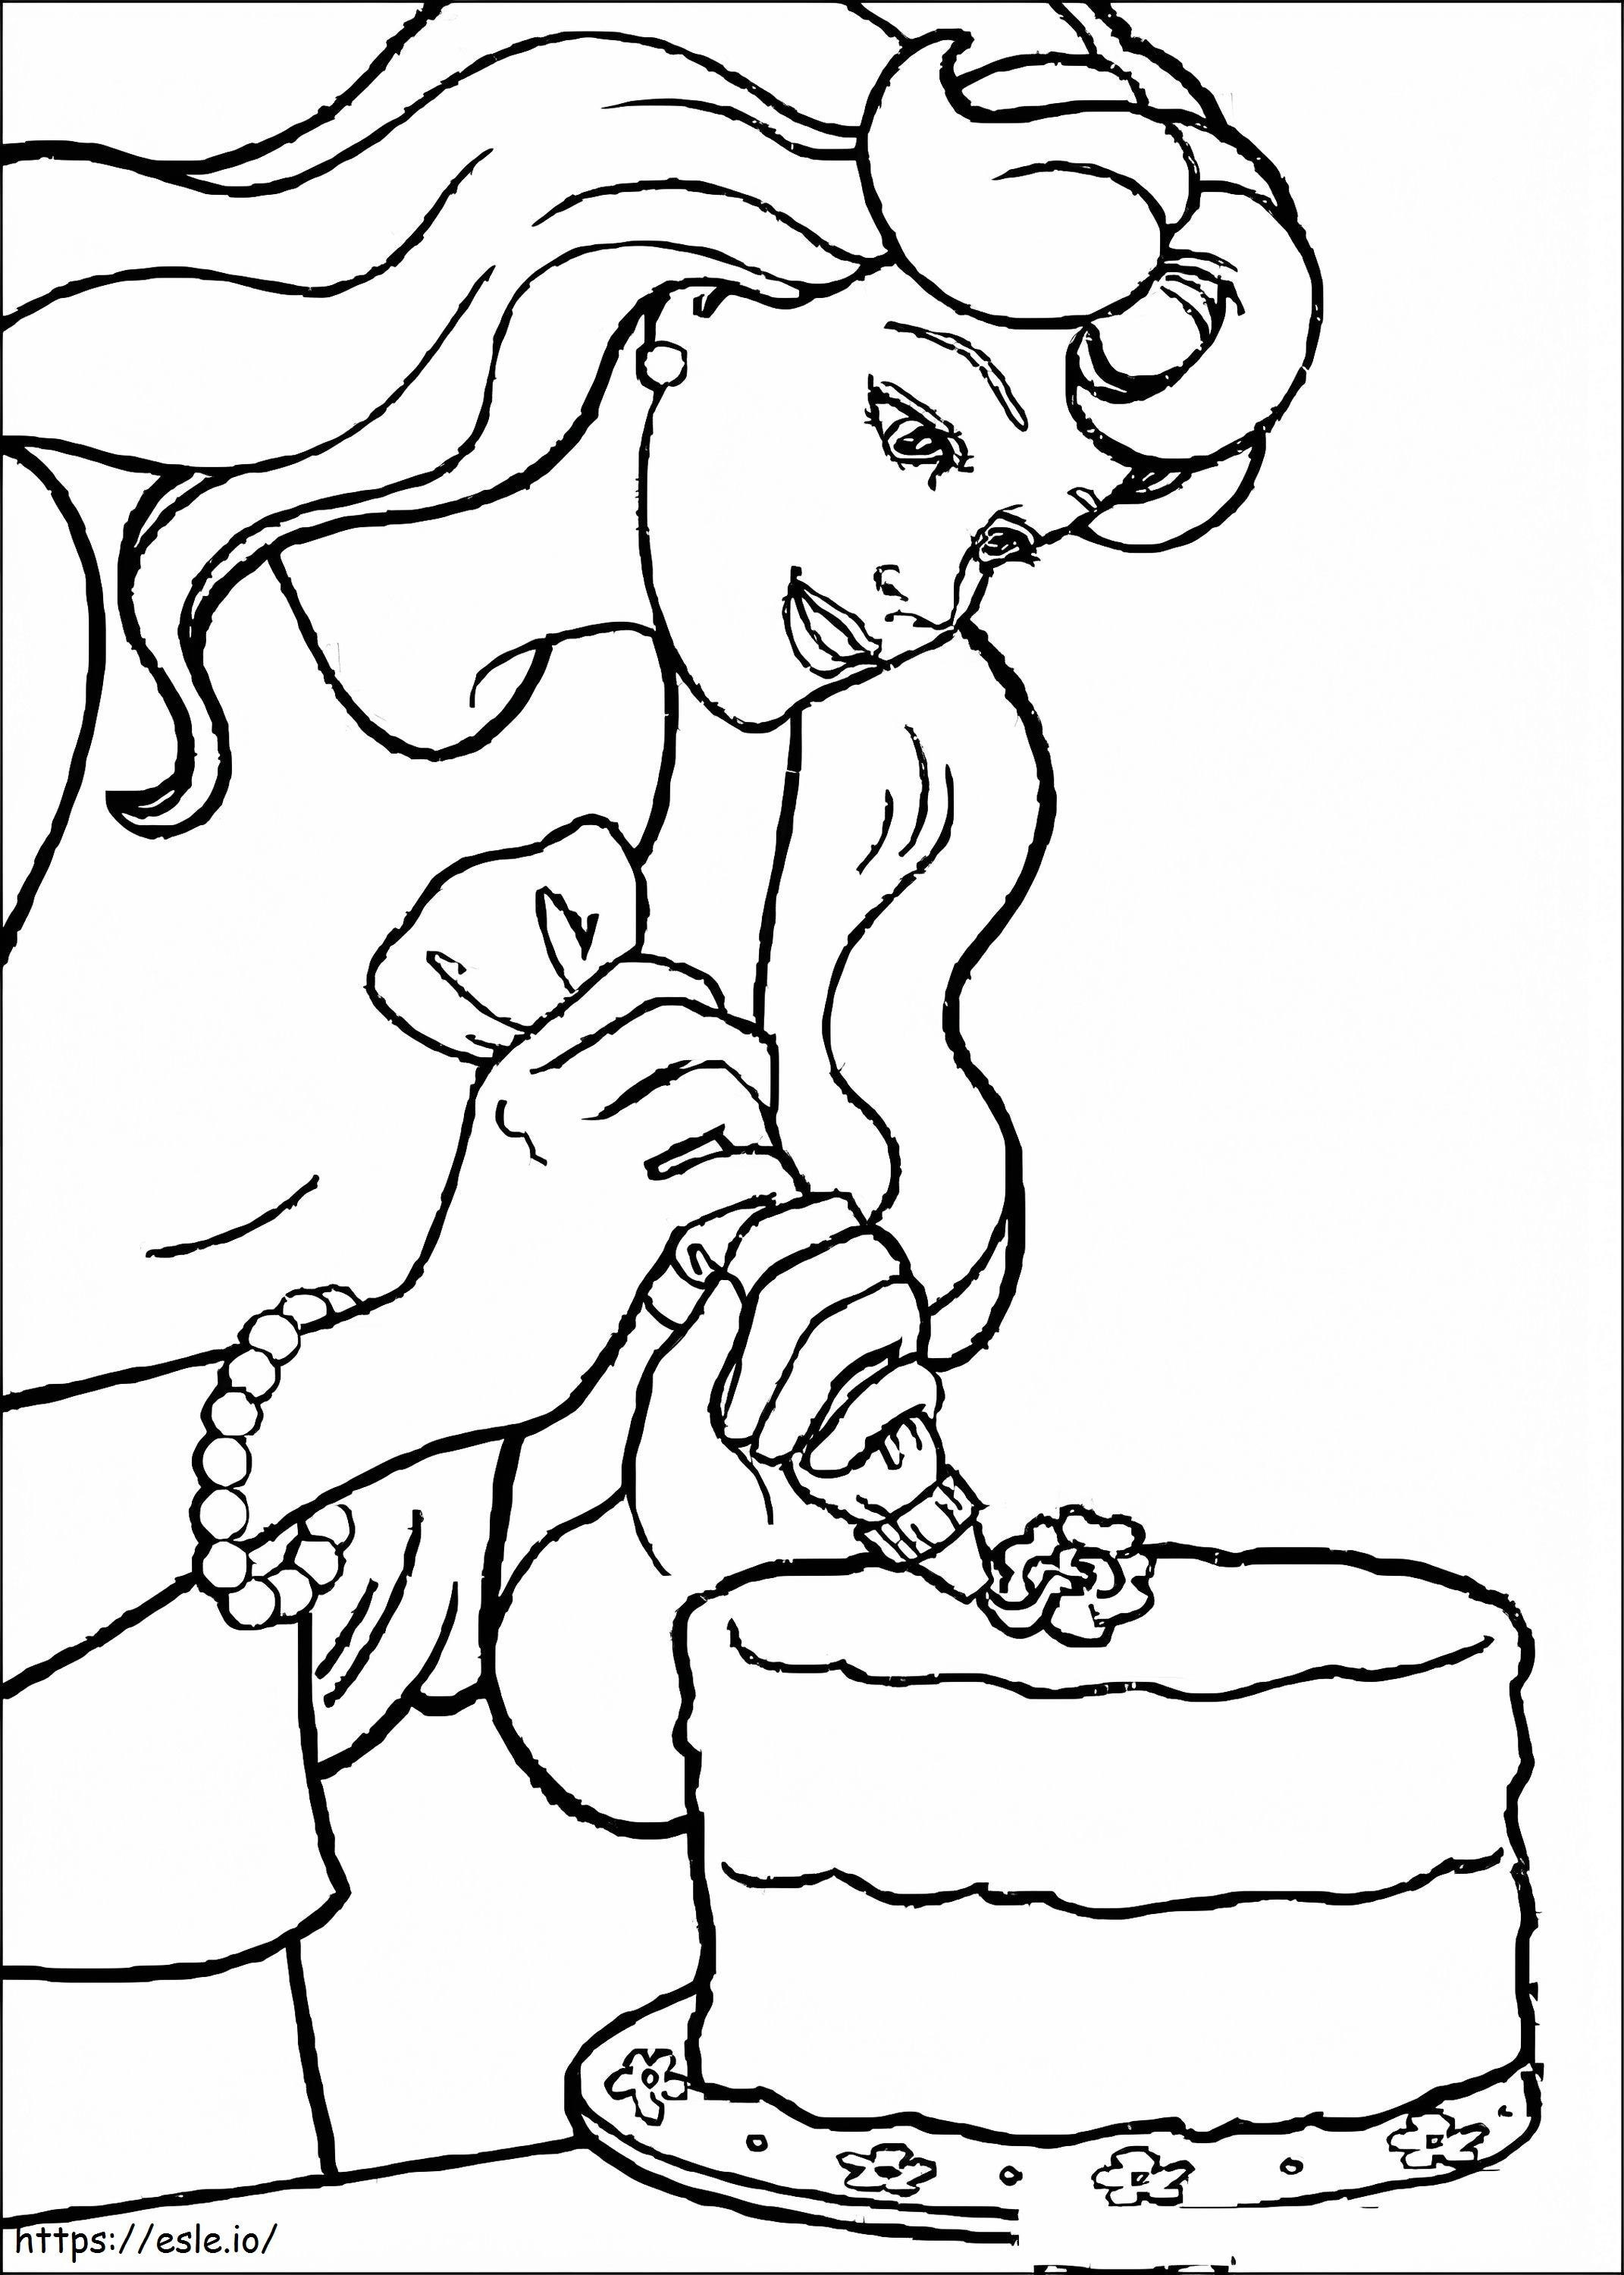 Barbie With Cake coloring page